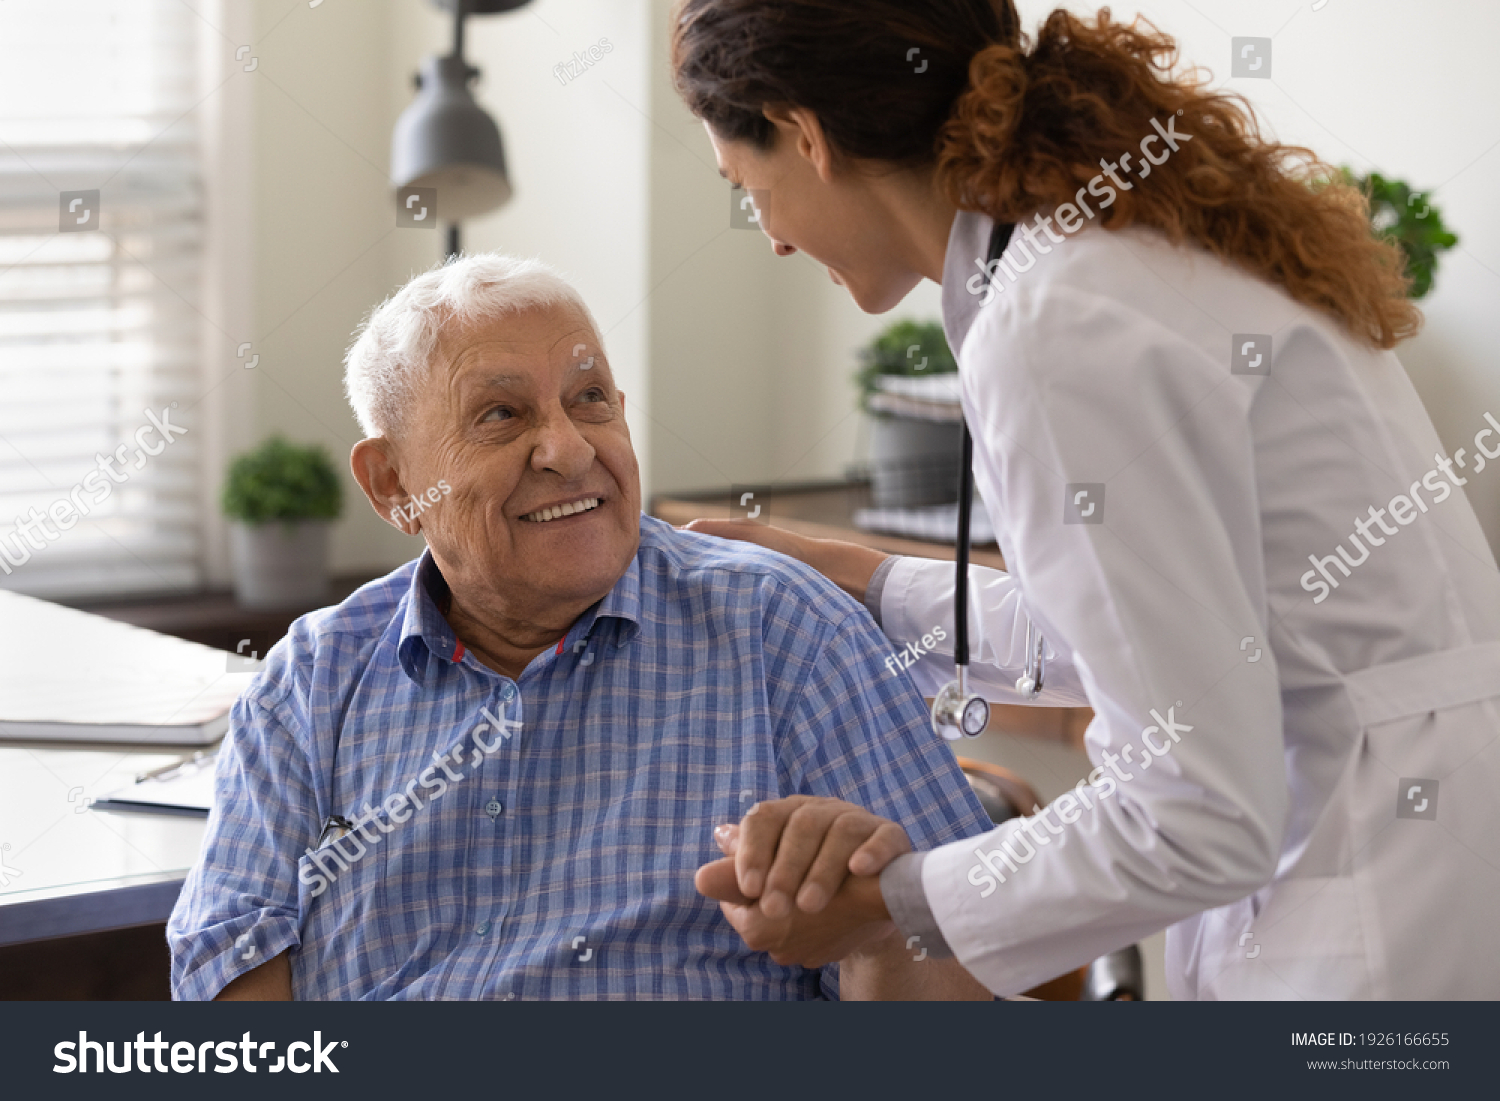 Close up caring nurse holding smiling mature patient hand at meeting in hospital, doctor caregiver wearing uniform comforting and supporting senior man, good news about treatment, empathy and care #1926166655